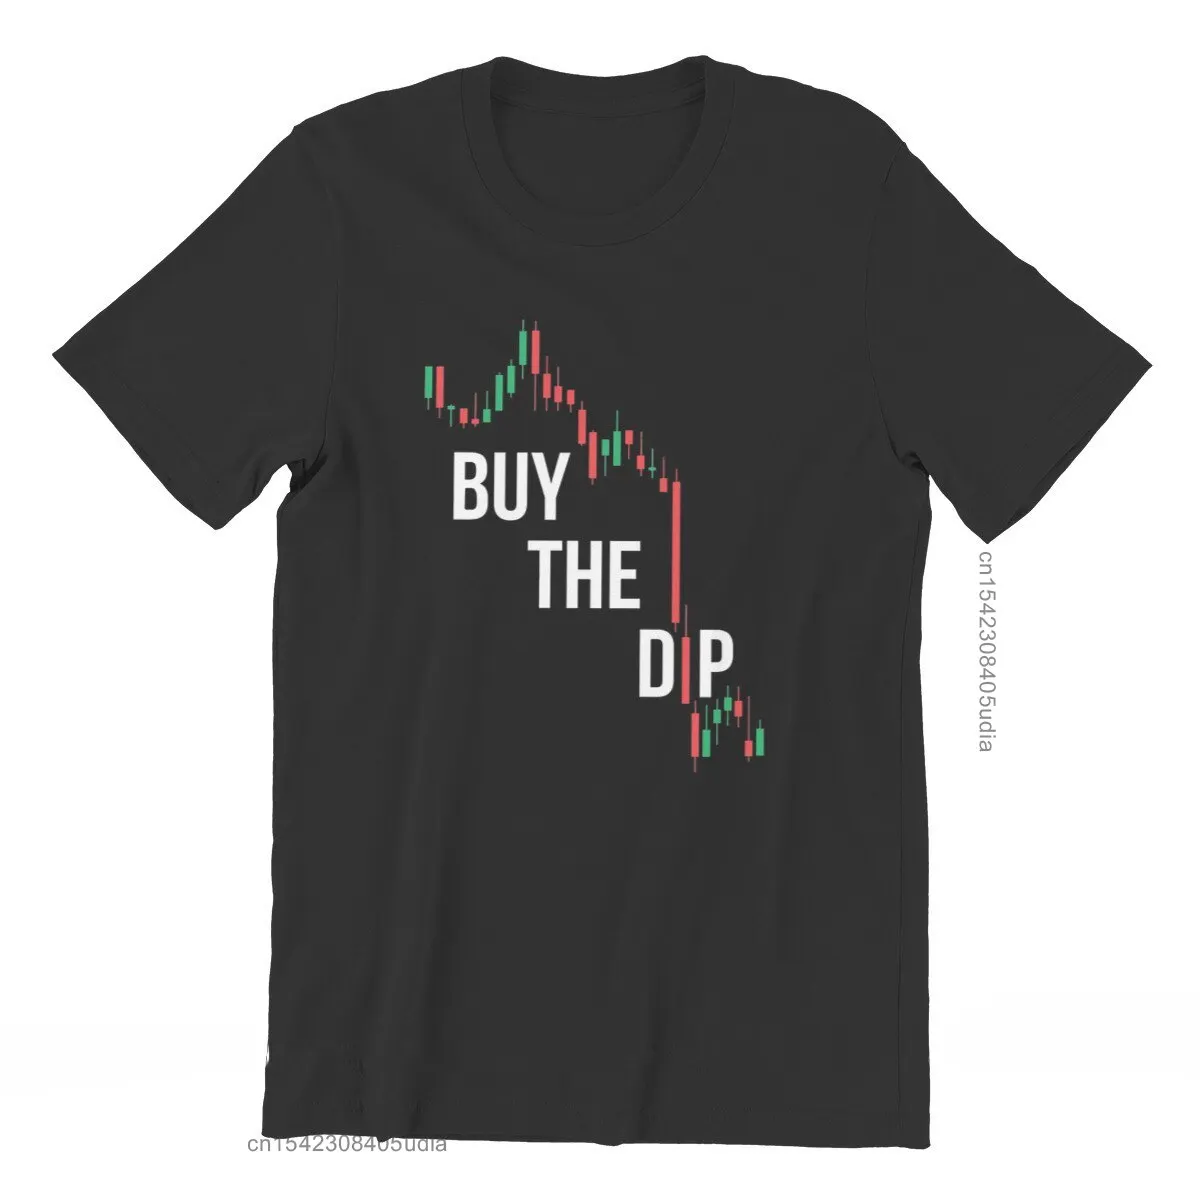 

Buy The Dip Btfd Bitcoin Cryptocurrency Meme T Shirt Vintage Graphic Oversized O-Neck Tshirt Top Sell Harajuku Men's Streetwear